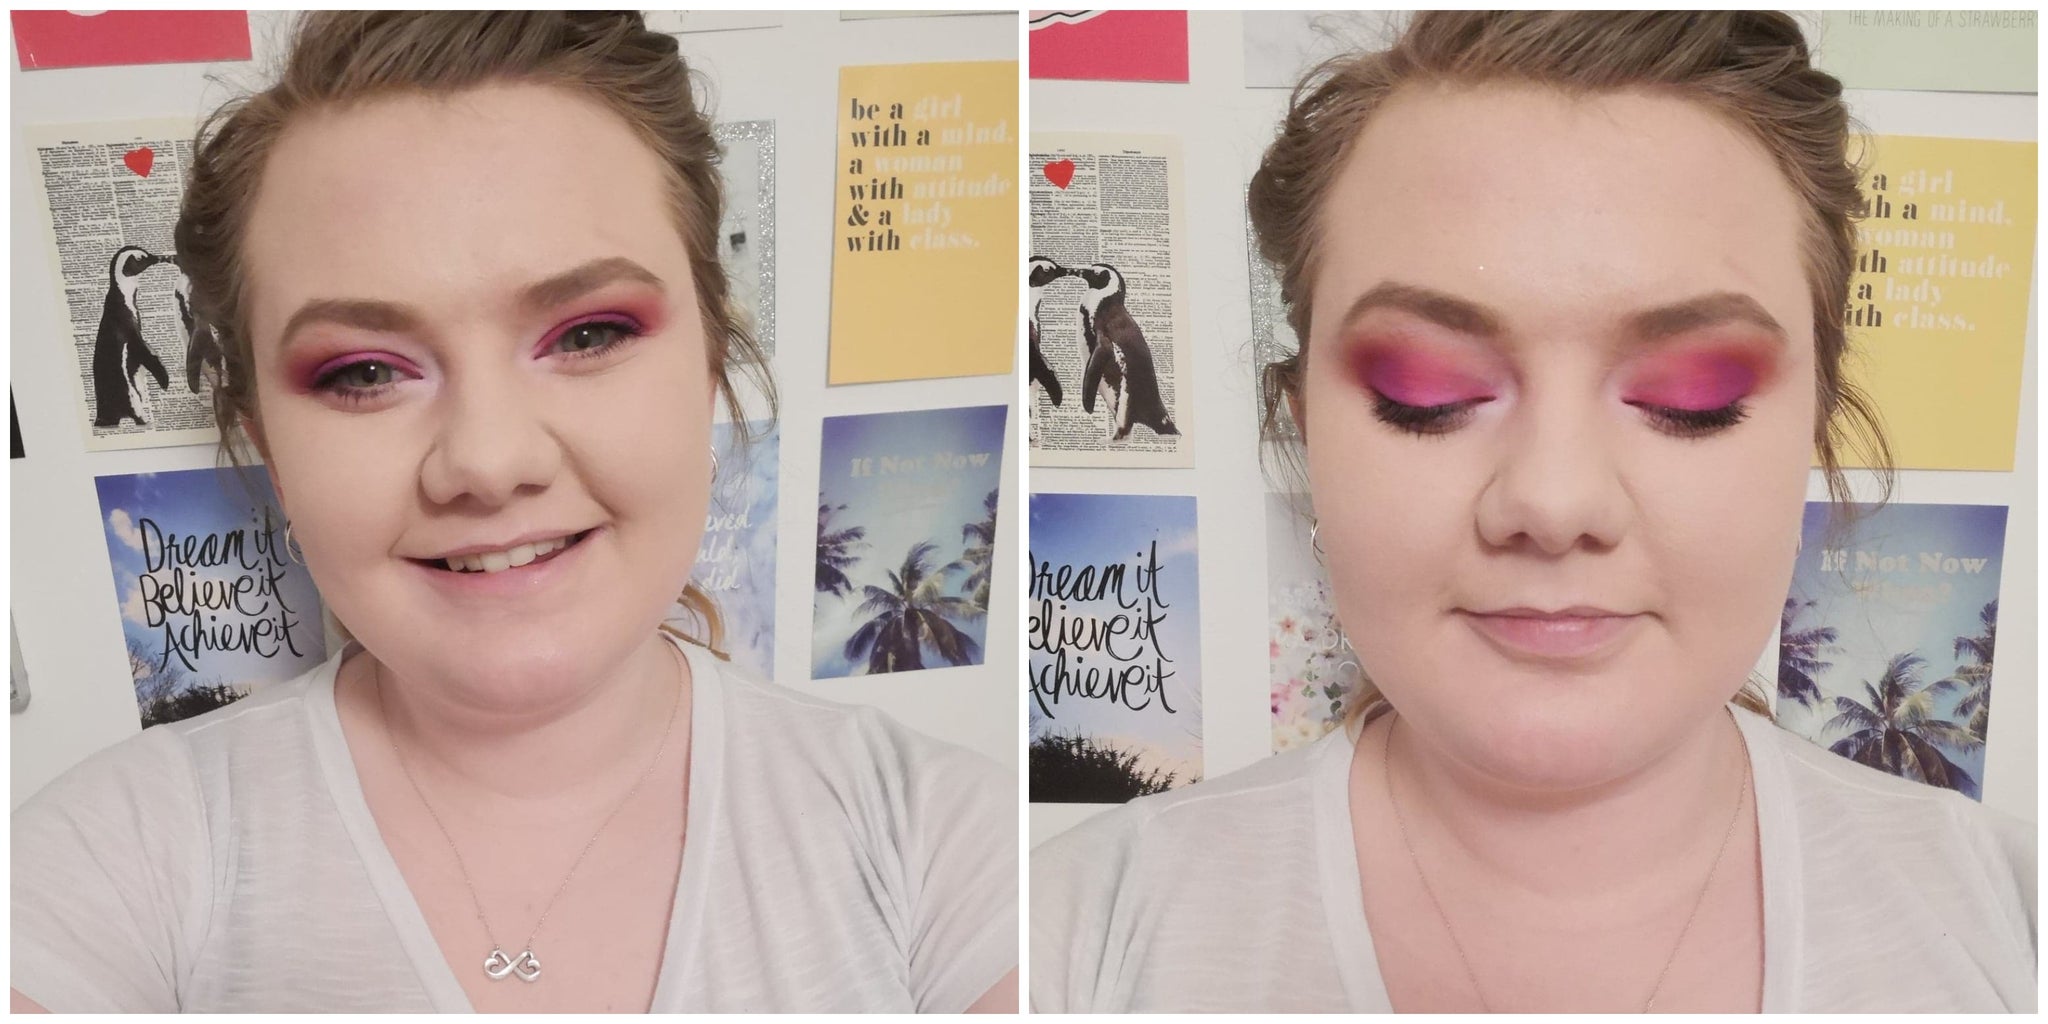 Girl posing with bright pink make up look